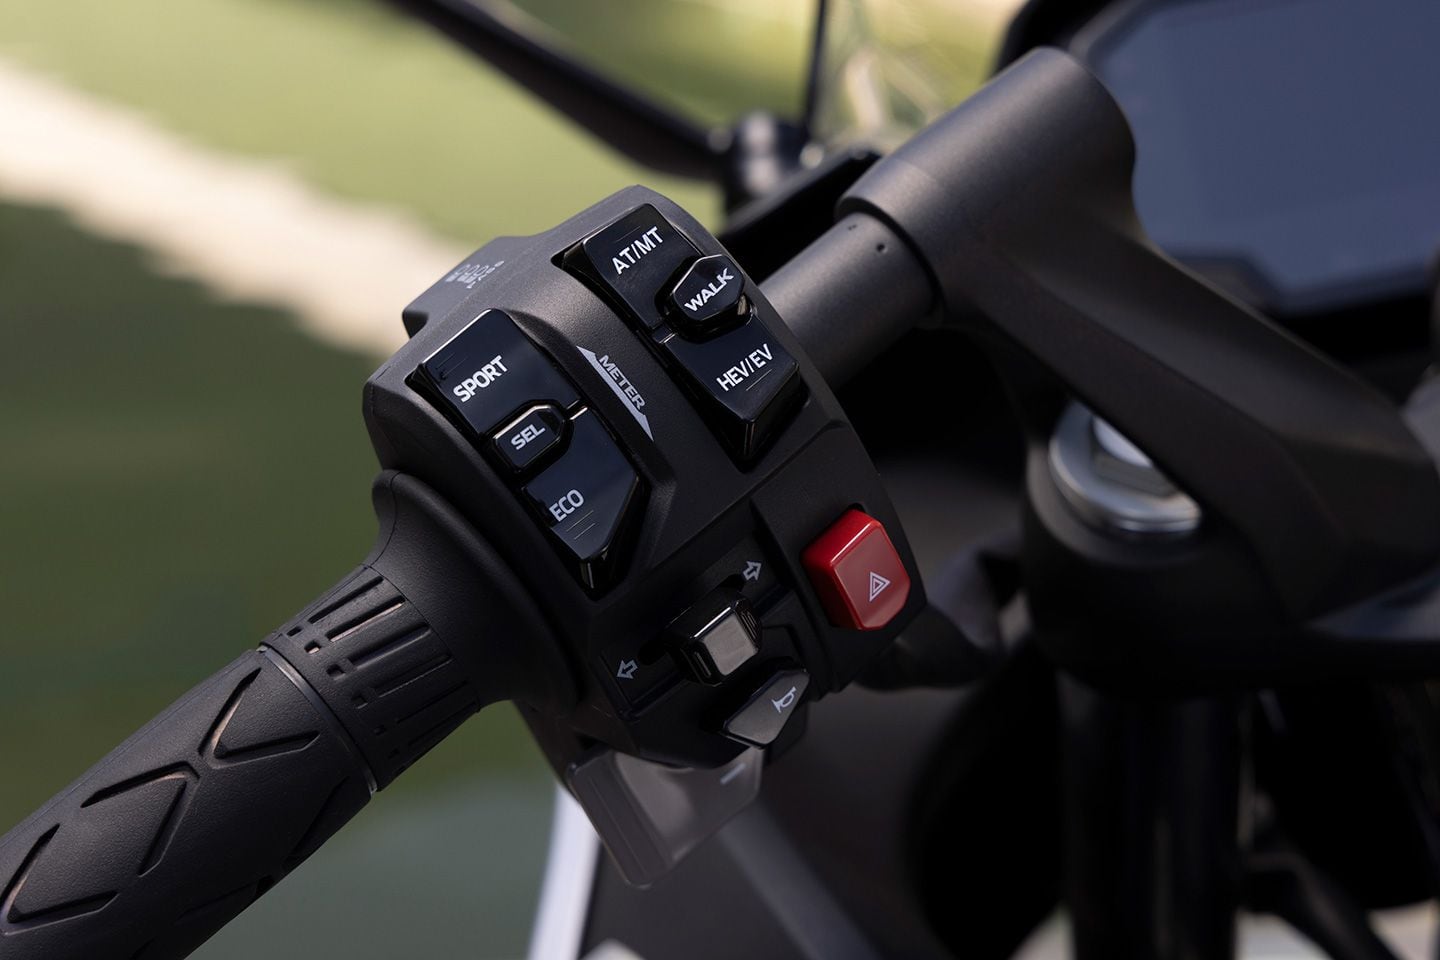 Switch cluster on the left-side handlebar has all of the buttons for switching between ride modes, automatic or manual transmission, and hybrid or electric power. Buttons also enable you to activate Walk mode and navigate vehicle settings through the TFT display